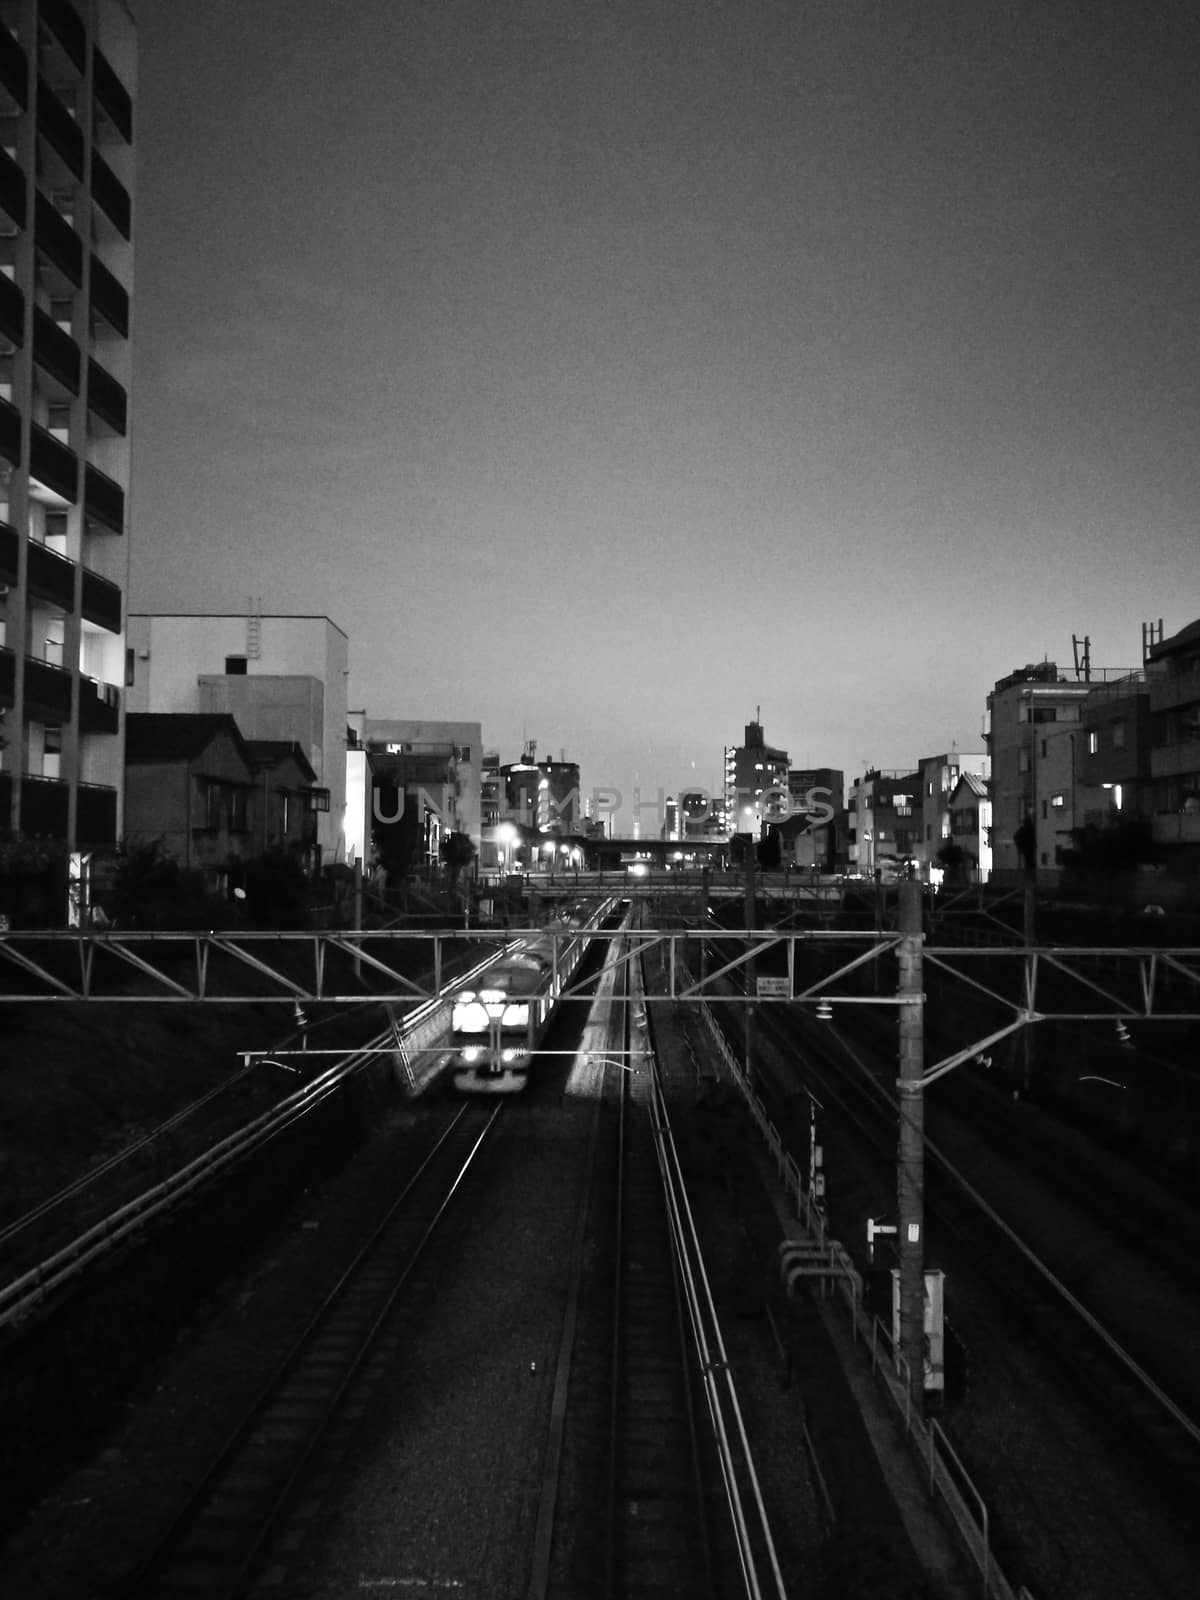 Moving motion scene of night train out of city center in black and white